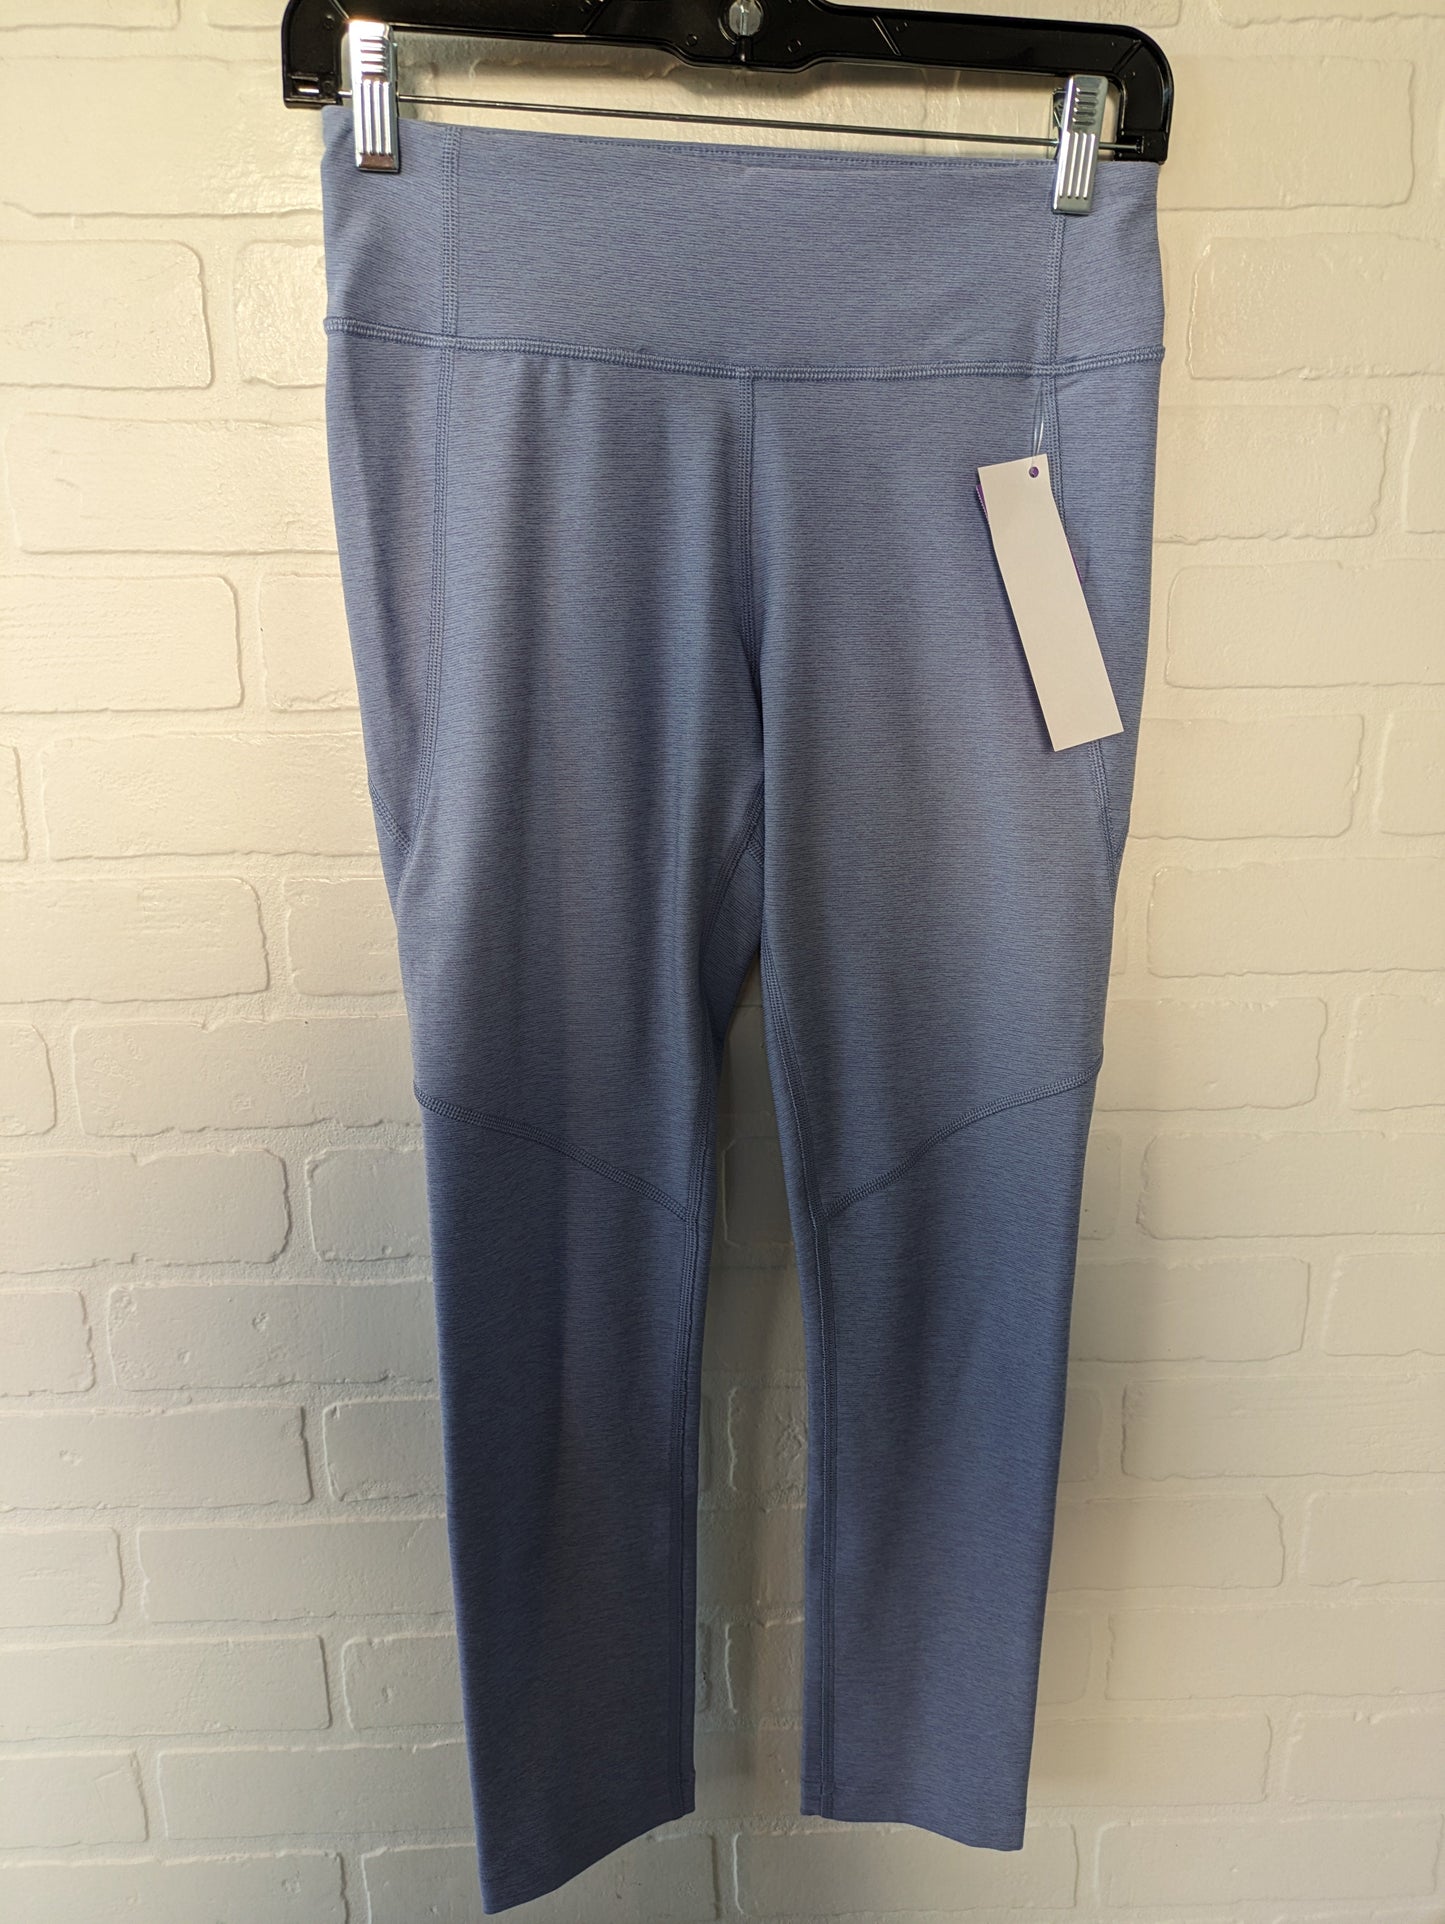 Blue Athletic Leggings Outdoor Voices, Size 4